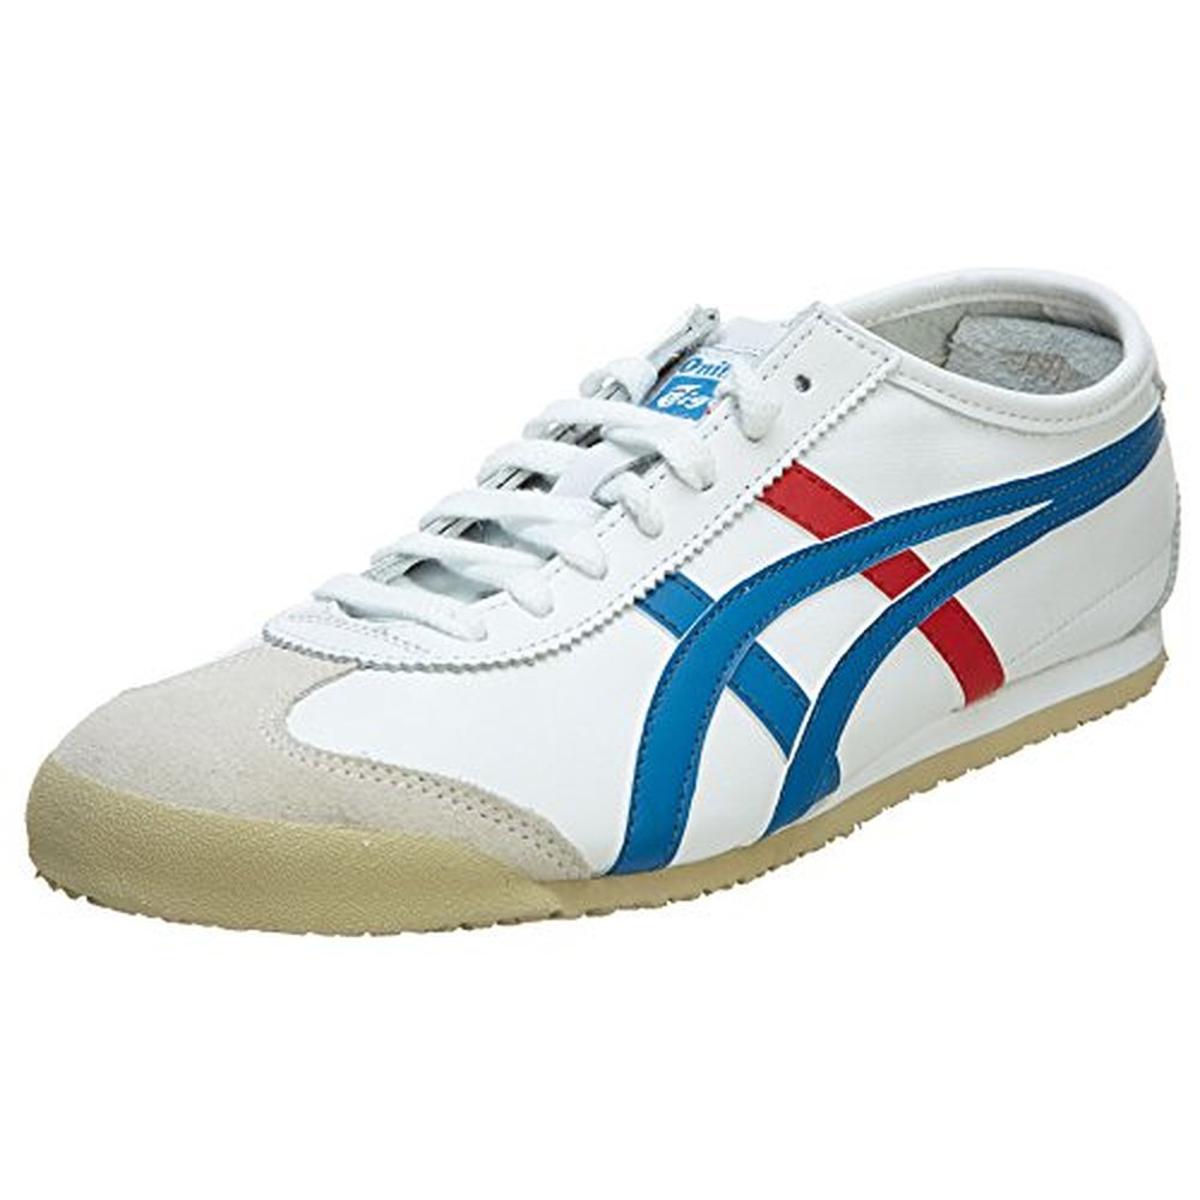 Onitsuka Tiger 4624 Mens Leather Running, Cross Training Shoes Sneakers ...